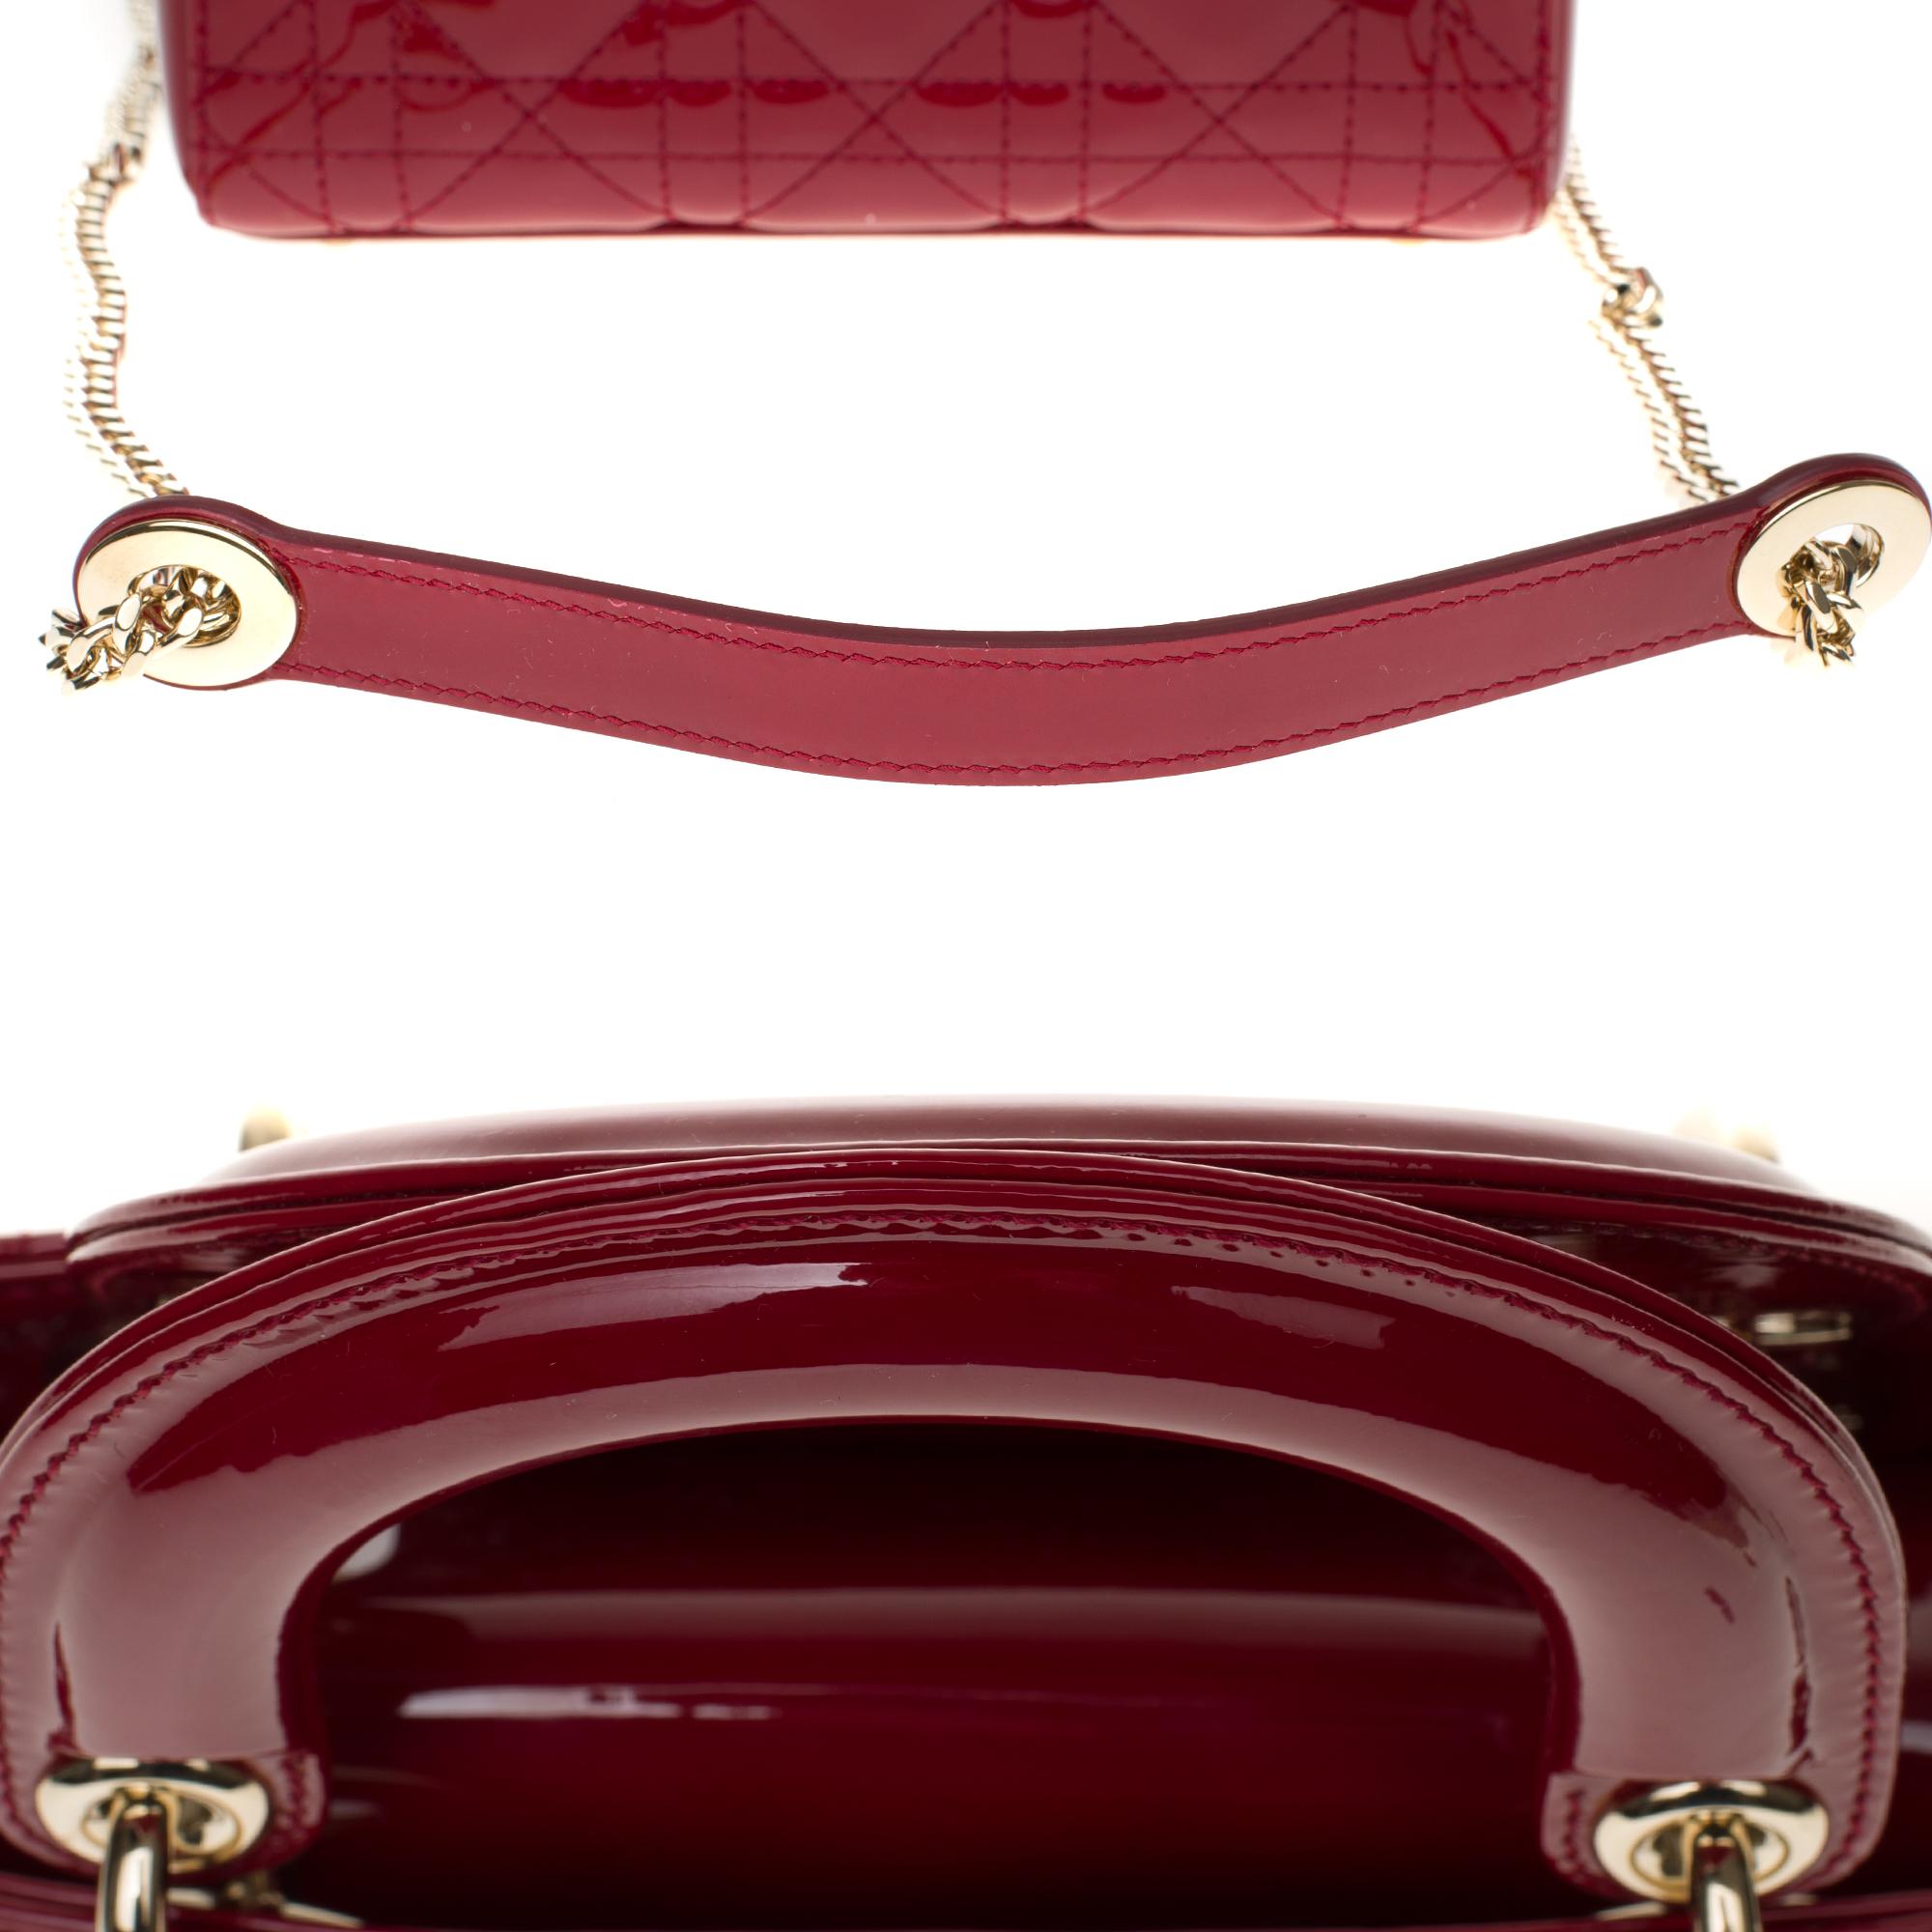 Brand new - Mini Lady Dior handbag with strap in cherry red patent leather 2